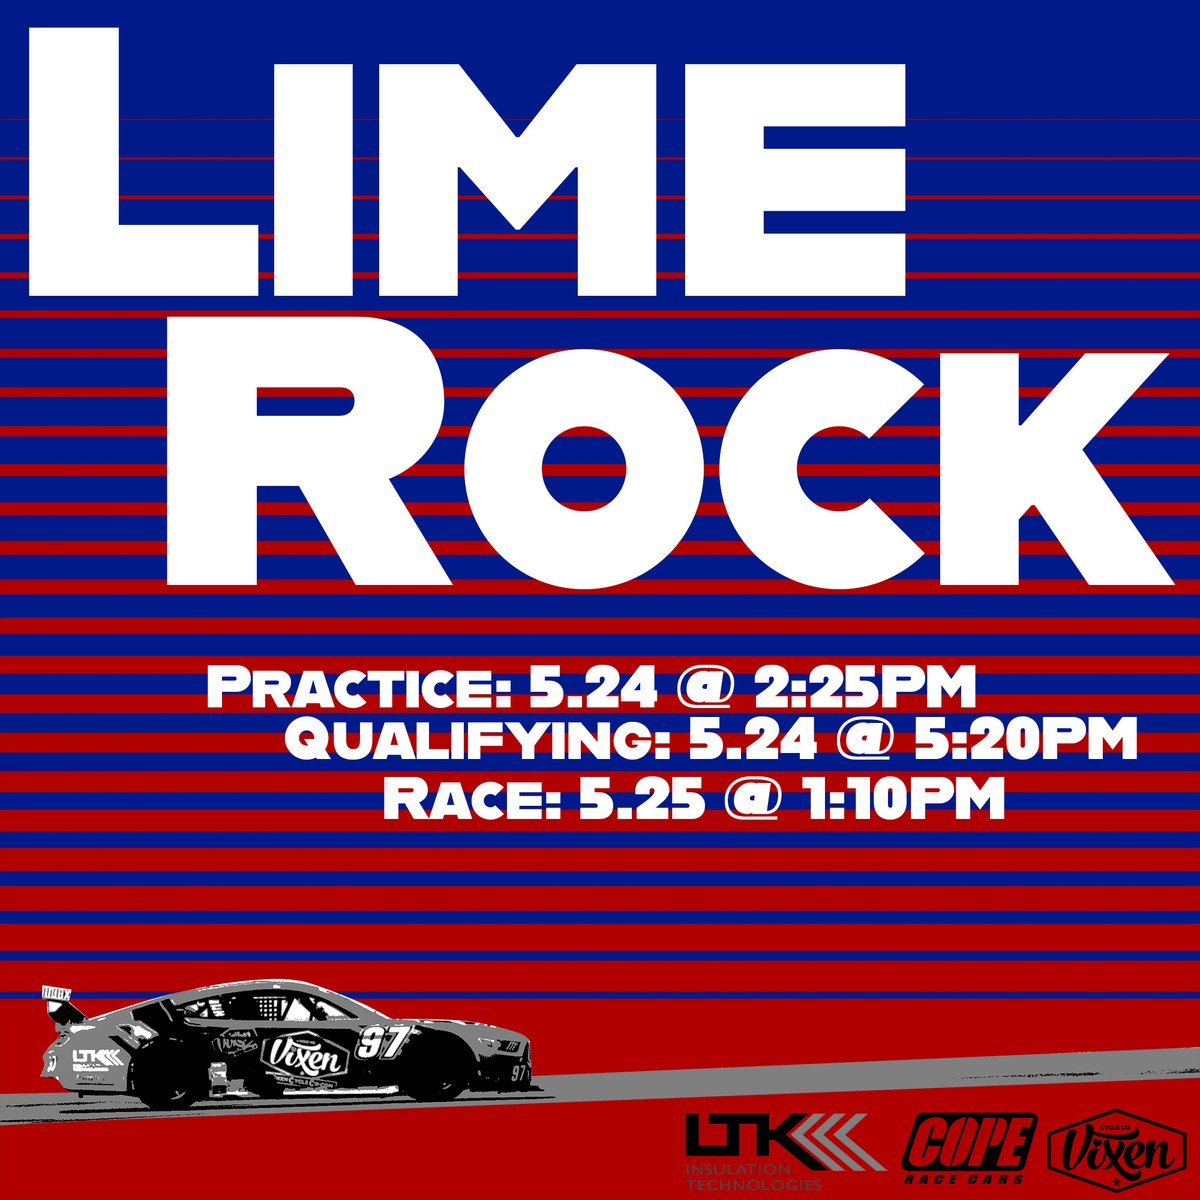 😊 Time to get busy!

🙌 We are at lovely Lime Rock this weekend.

#vixencycle #gotransam #GoLTK #TA2 #motorsport #weekend #pirelli #mavtv #racing #media #pr #Mustang #sports #limerockpark #copecars